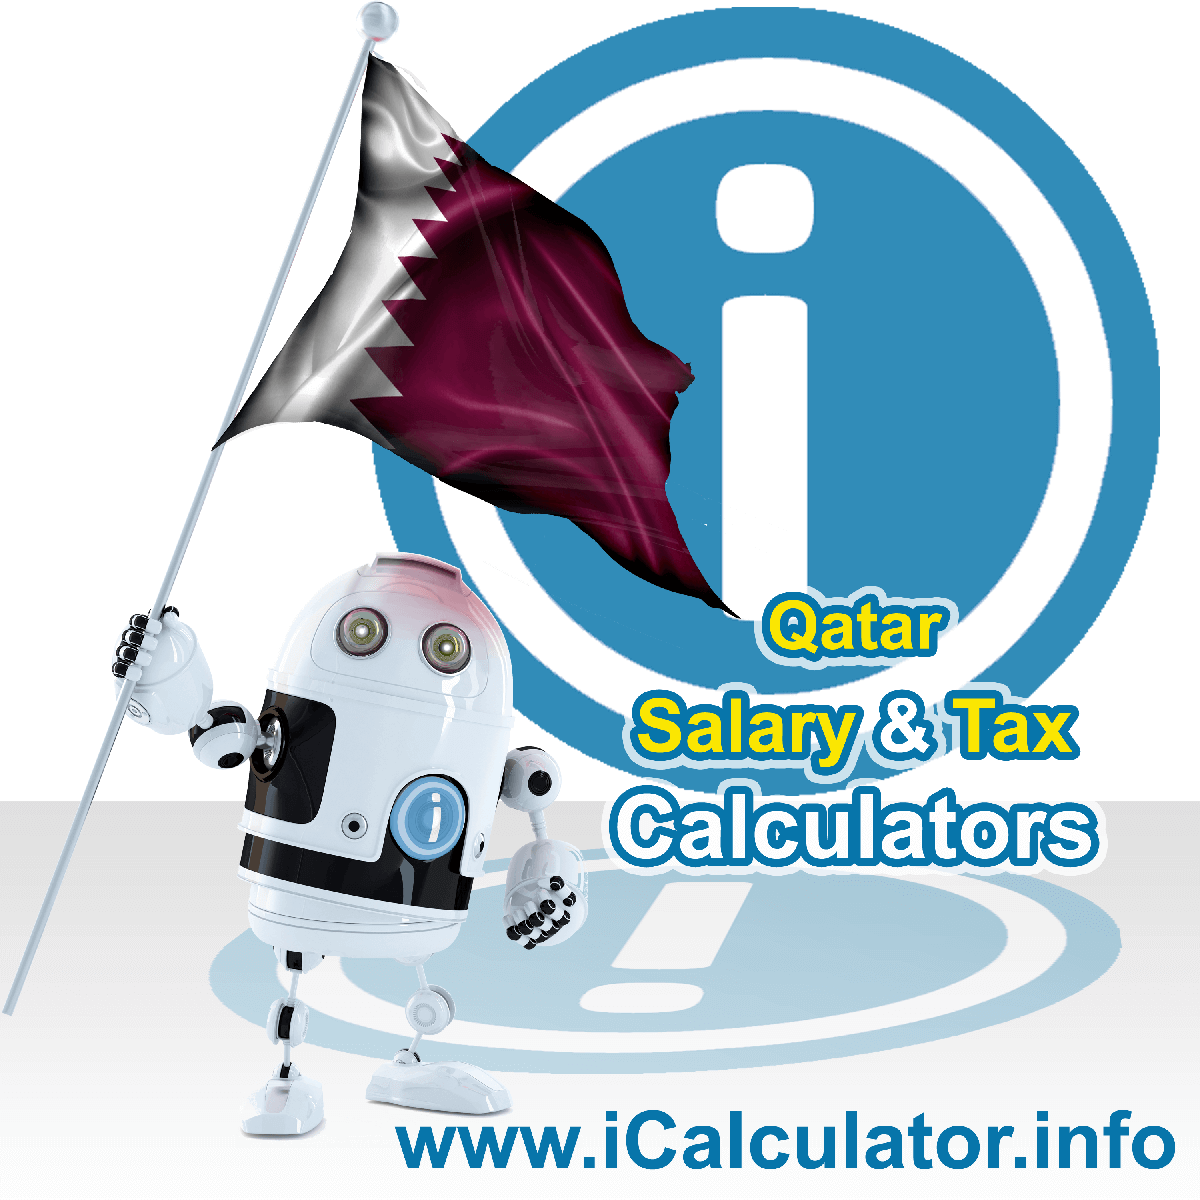 Qatar Salary Calculator. This image shows the Qatarese flag and information relating to the tax formula for the Qatar Tax Calculator